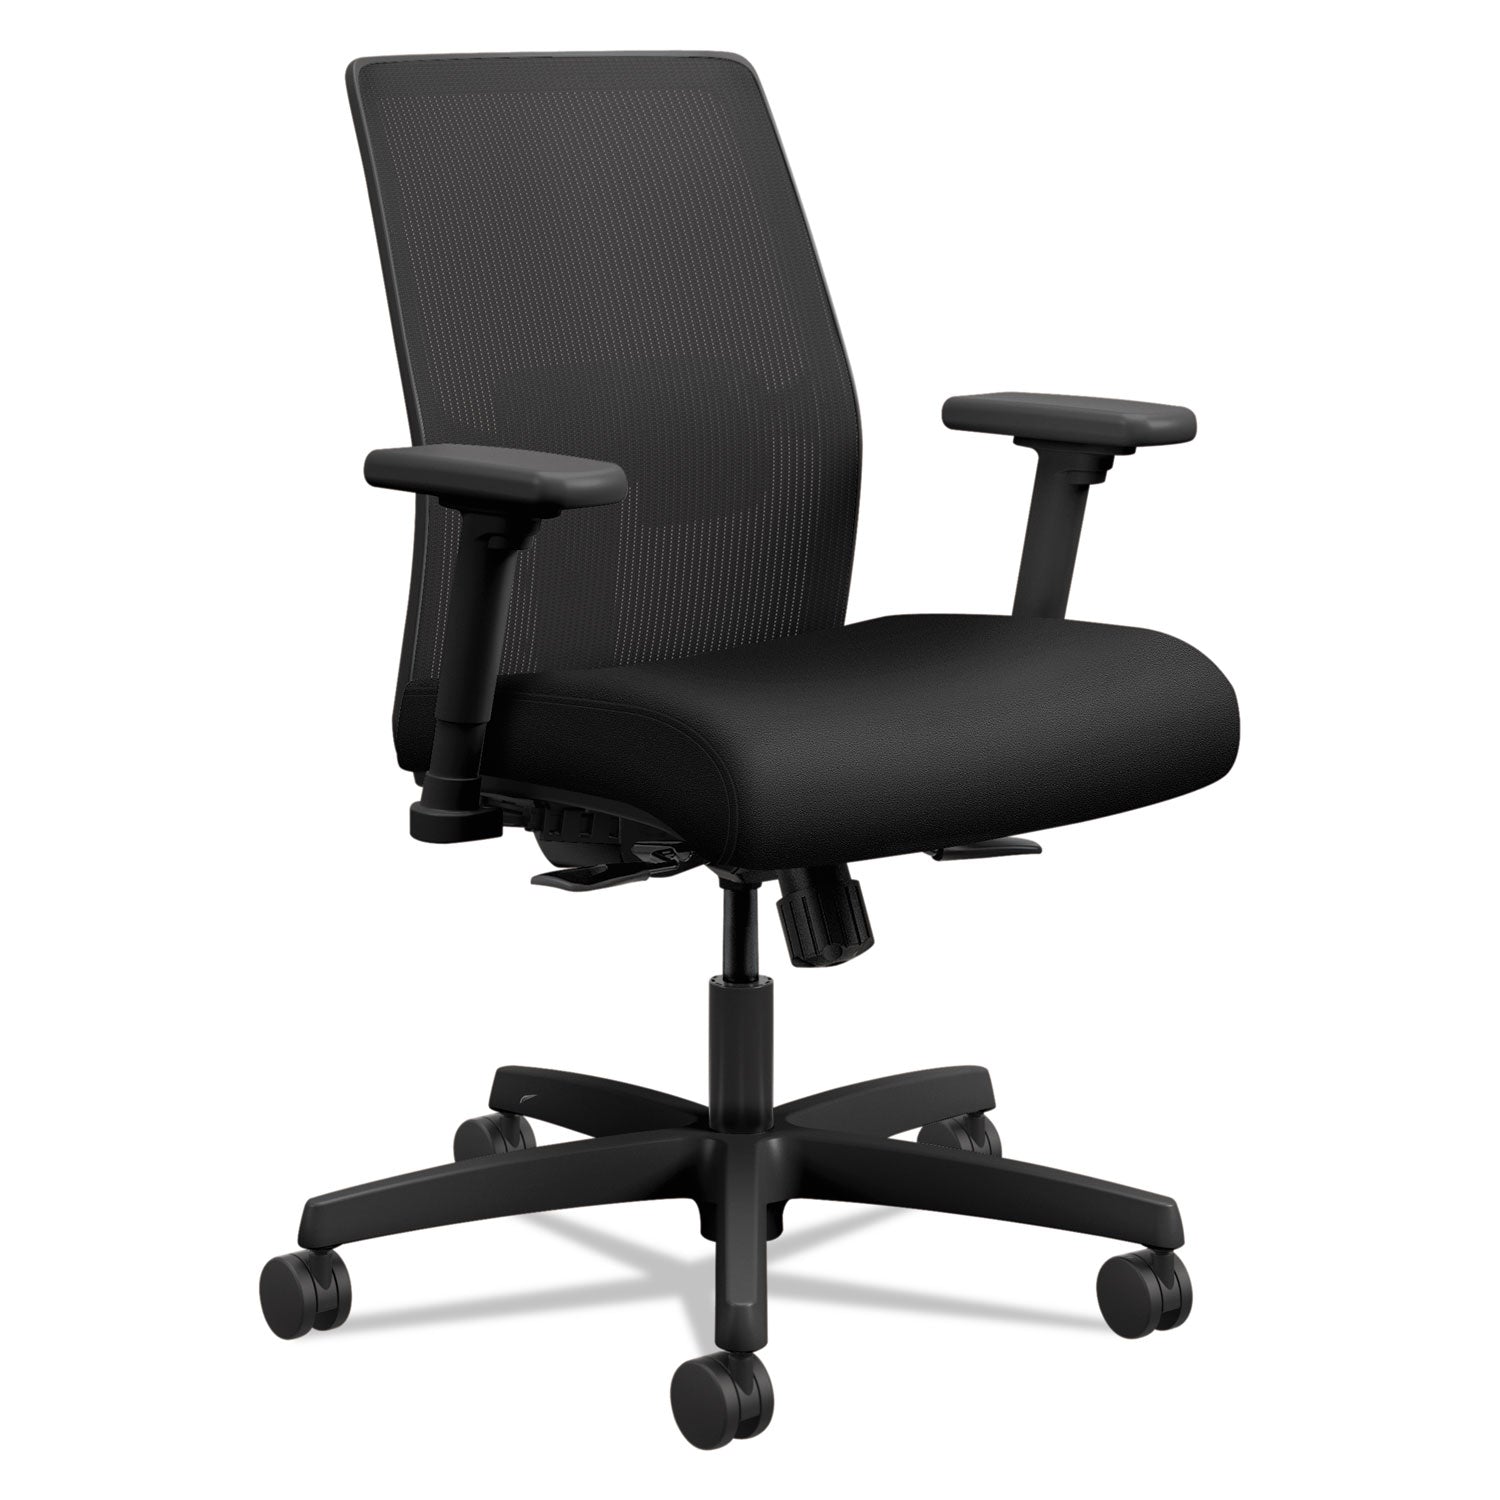 ignition-20-4-way-stretch-low-back-mesh-task-chair-supports-up-to-300-lb-1675-to-2125-seat-height-black_honitlmk1mc10b - 1